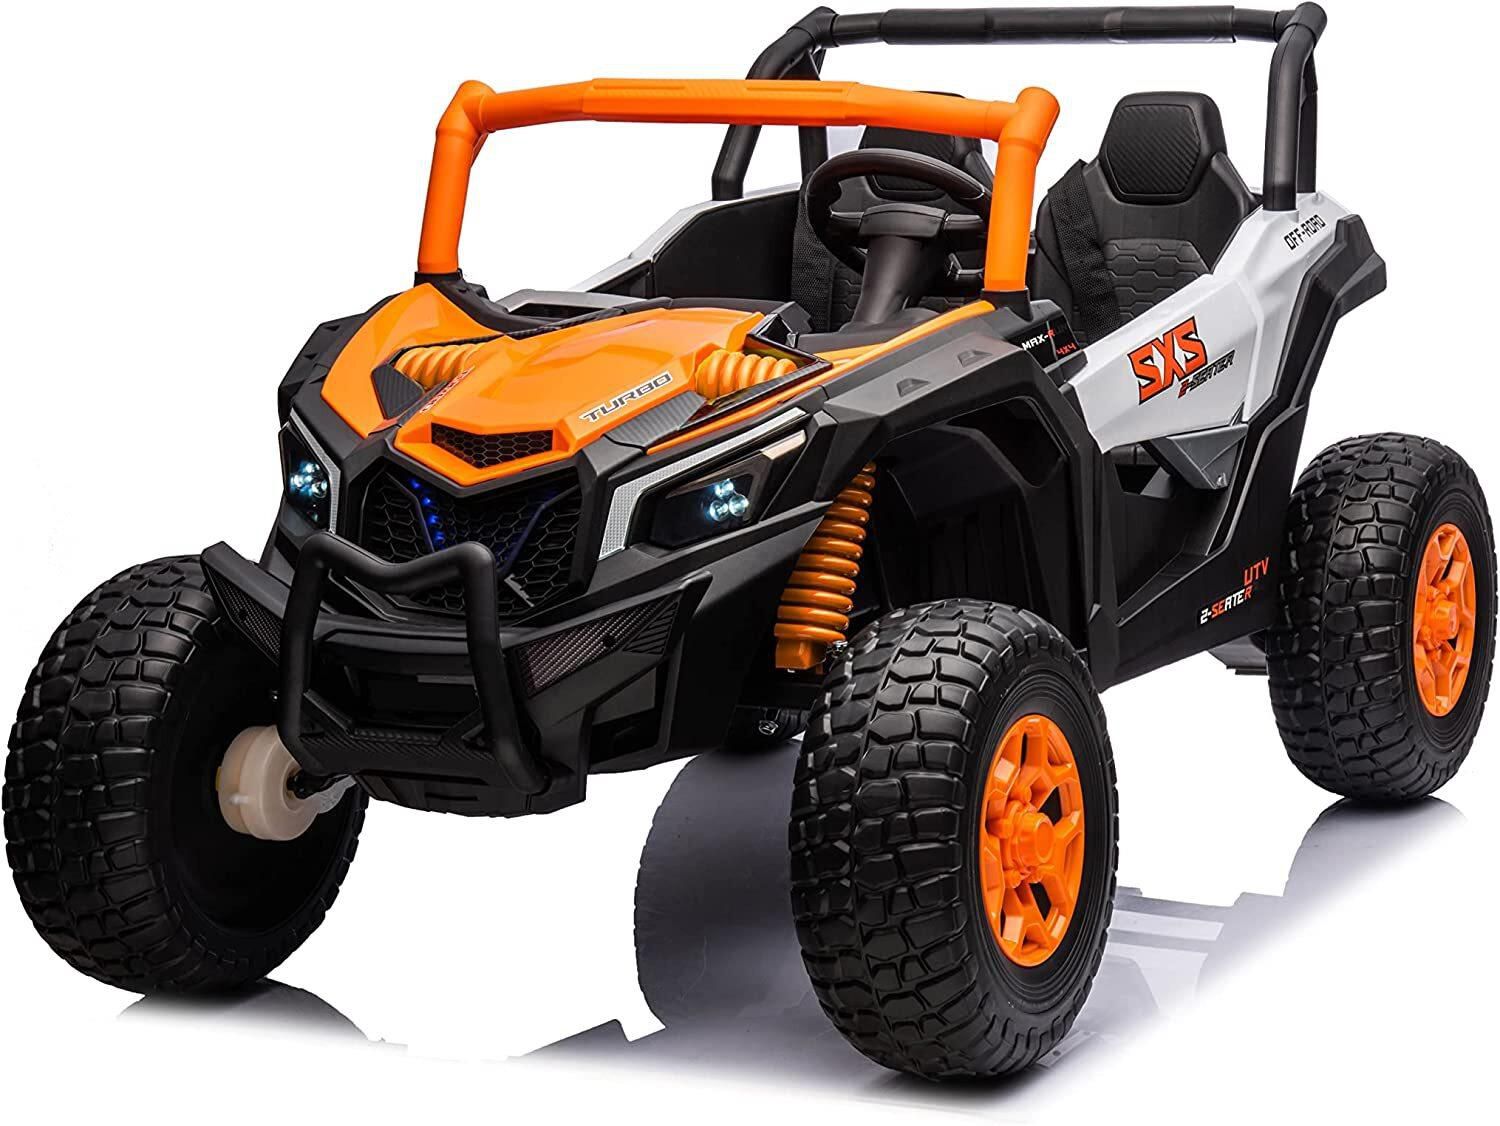 Lovely Baby Powered Riding UTV Jeep LB 812E Ride On Car/Jeep With Remote Control For Kids, Suspension System, Openable Doors, LED Lights, MP3 Player (Orange)